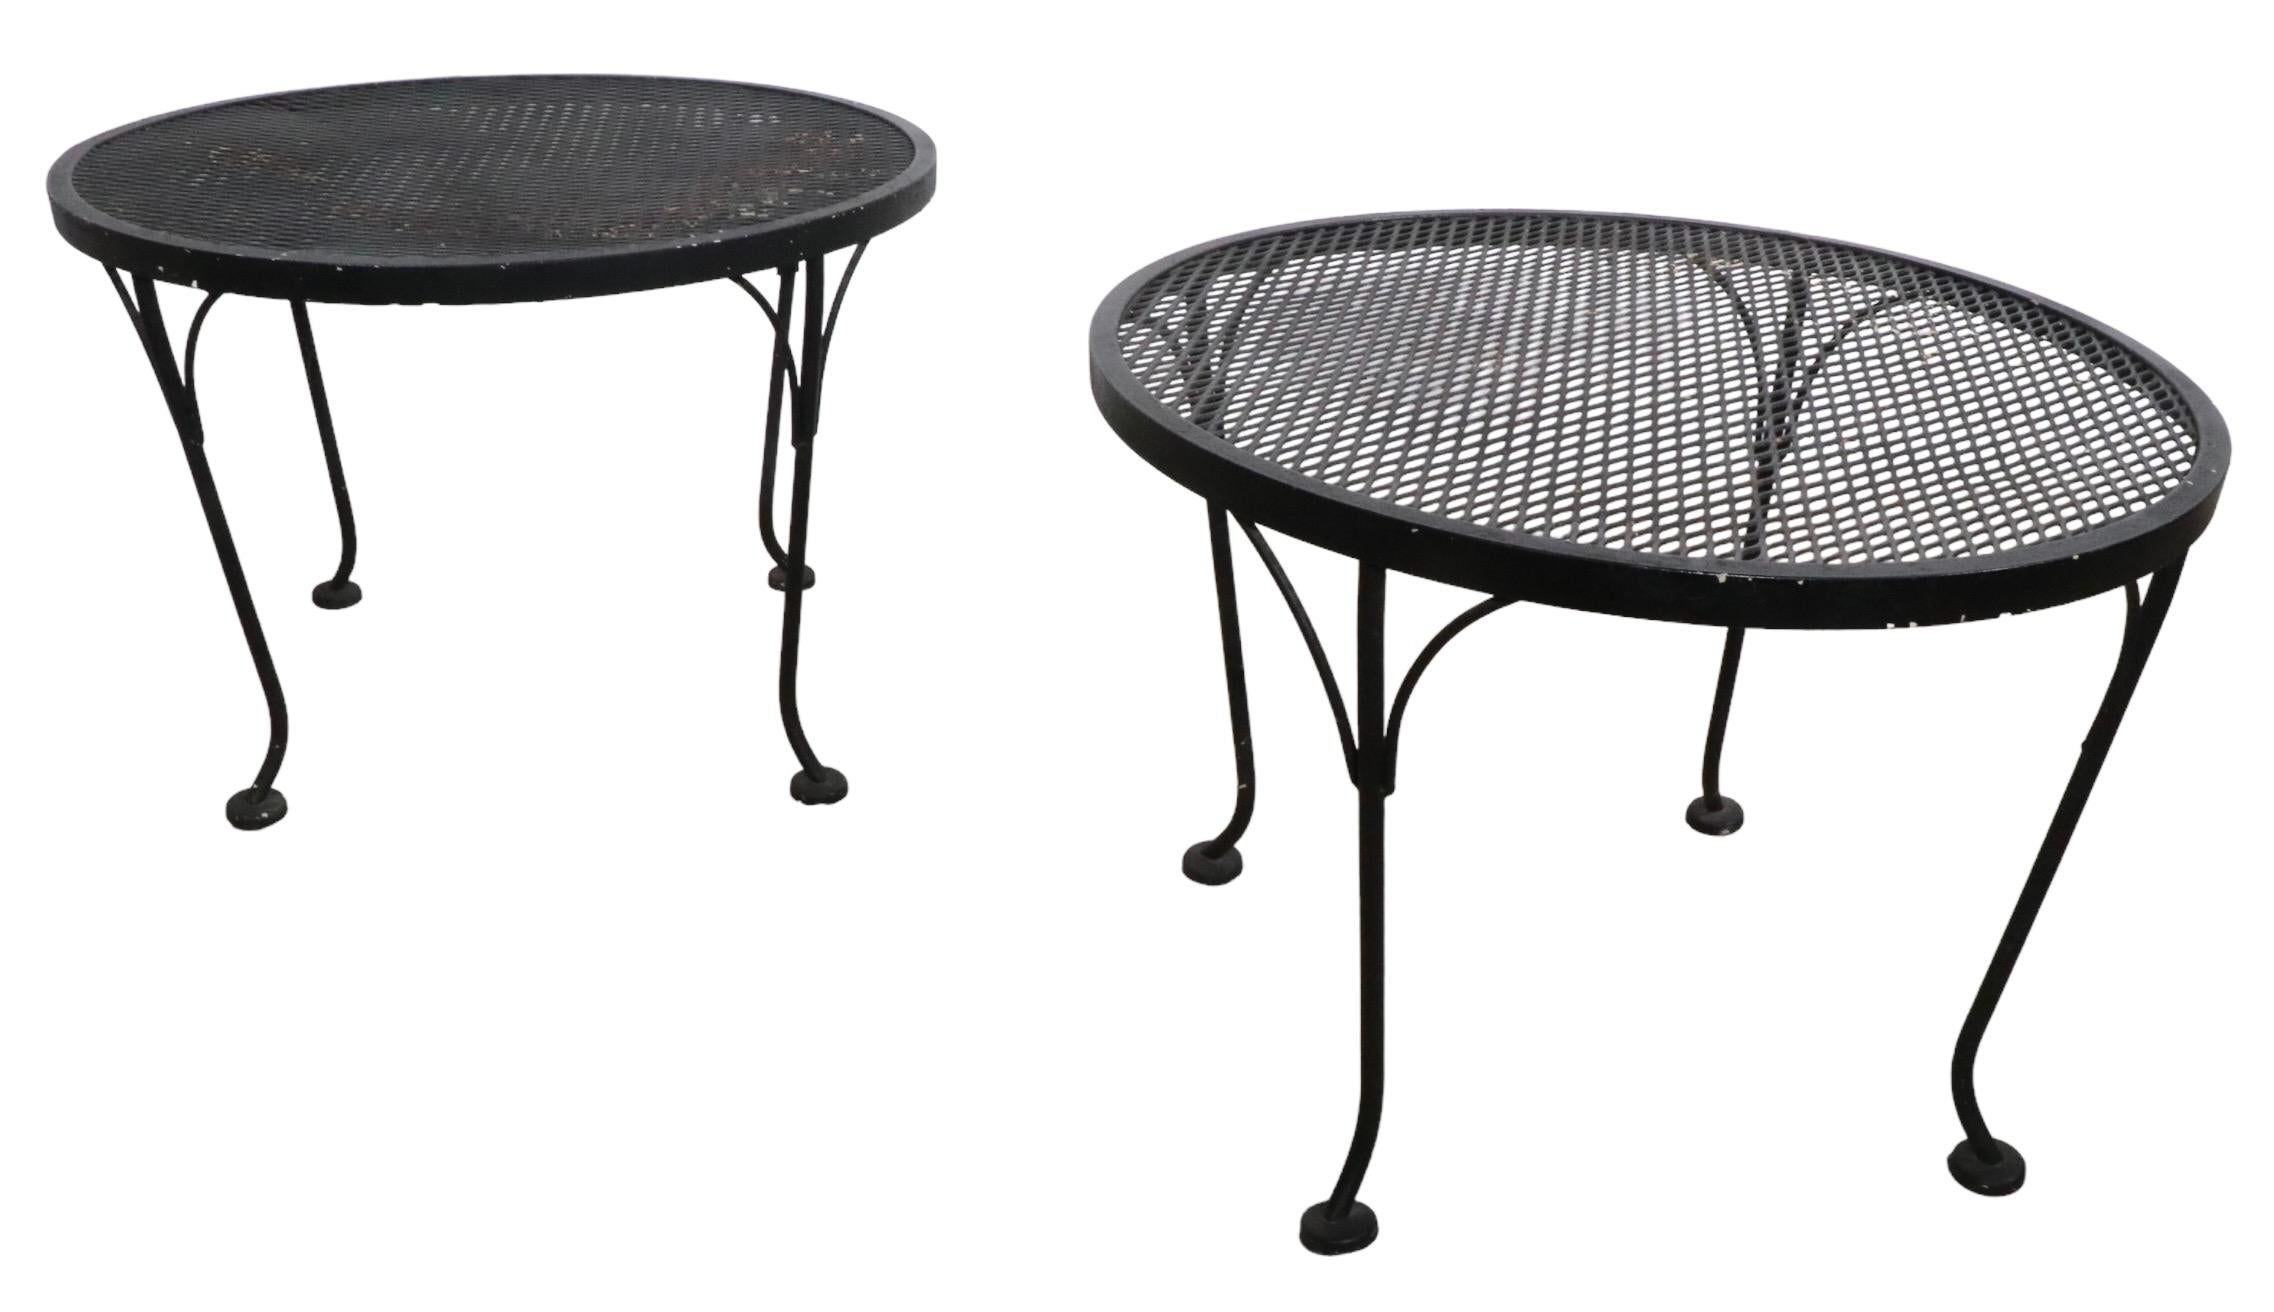 Wrought Iron and Metal Mesh Garden Patio Poolside Side Tables by Woodard 1